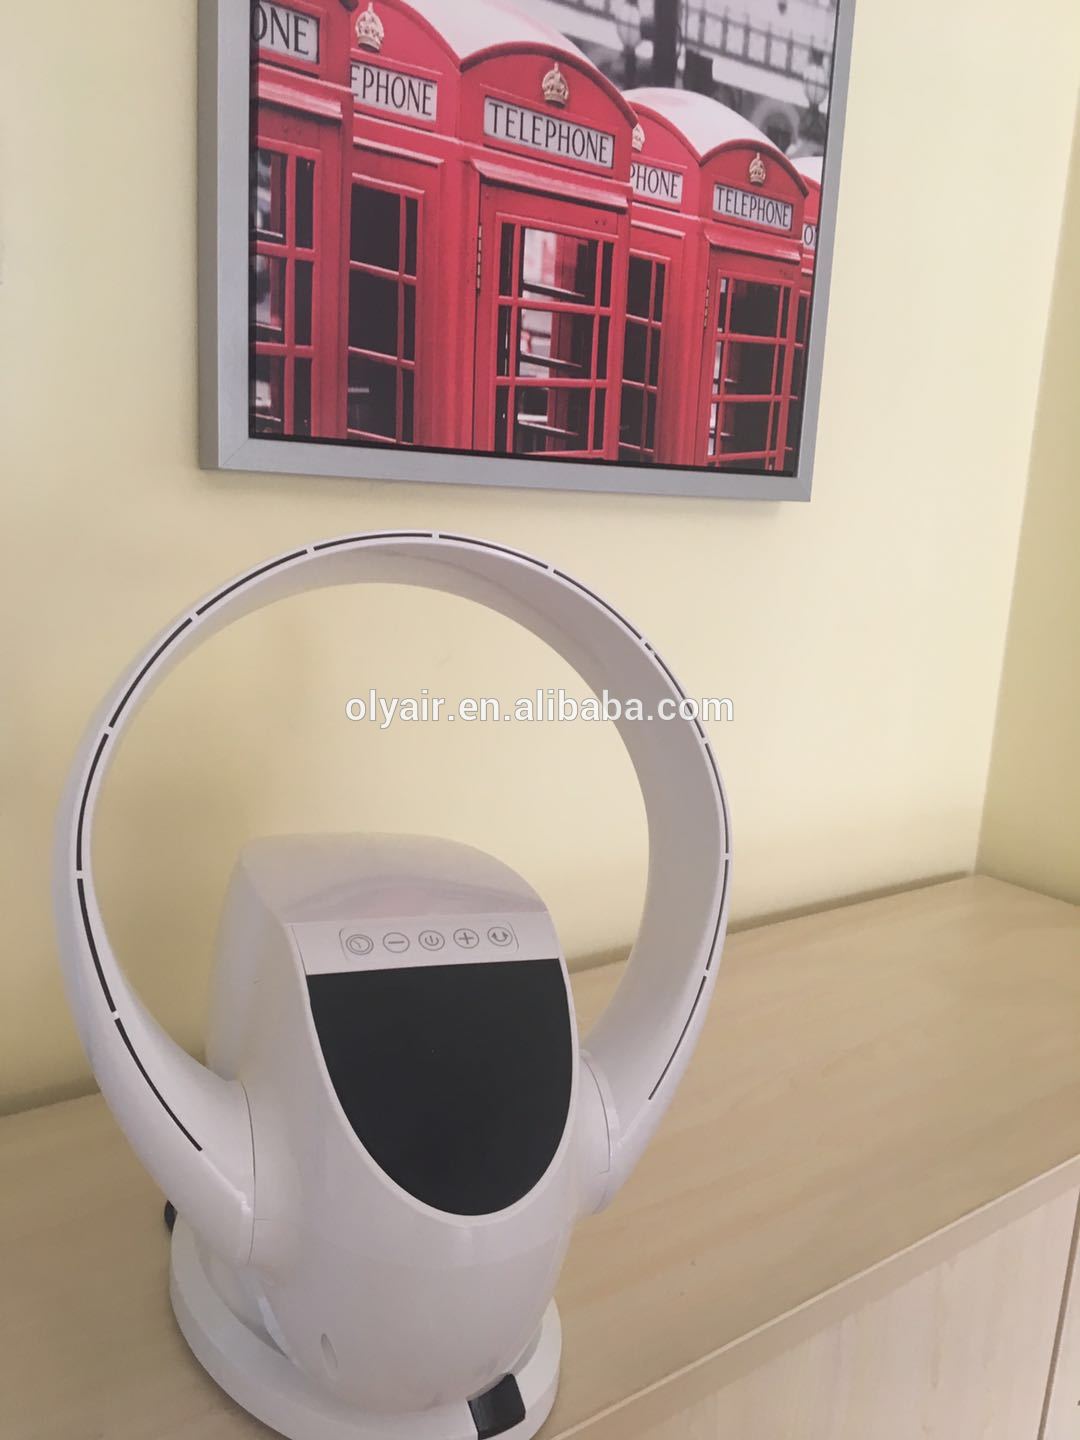 Wall mounted Bladeless Fan remote control LED Screen